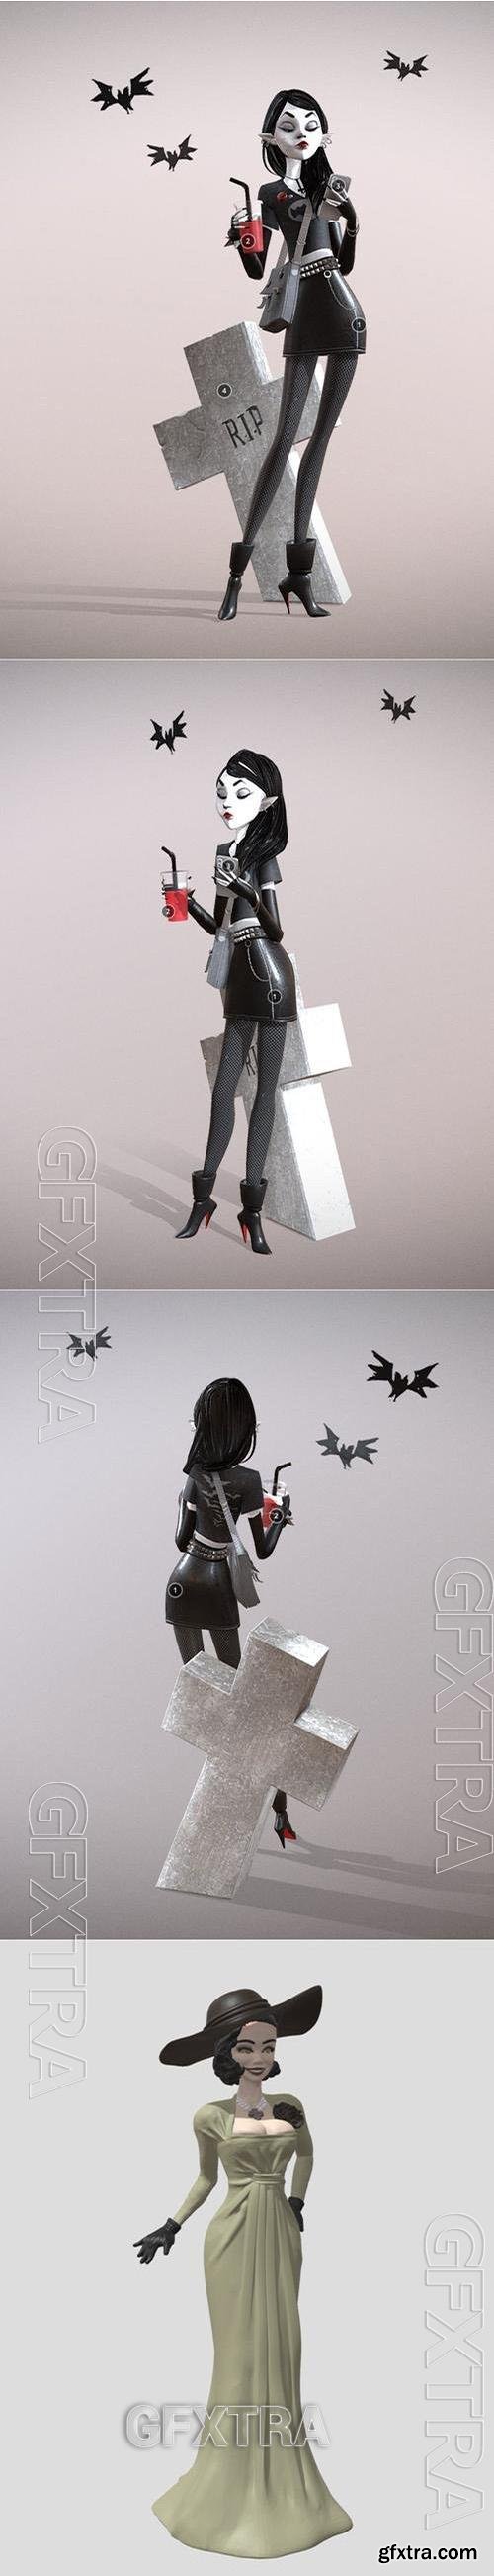 Vampire Lady and Resident Evil 8 Vampire lady 3D